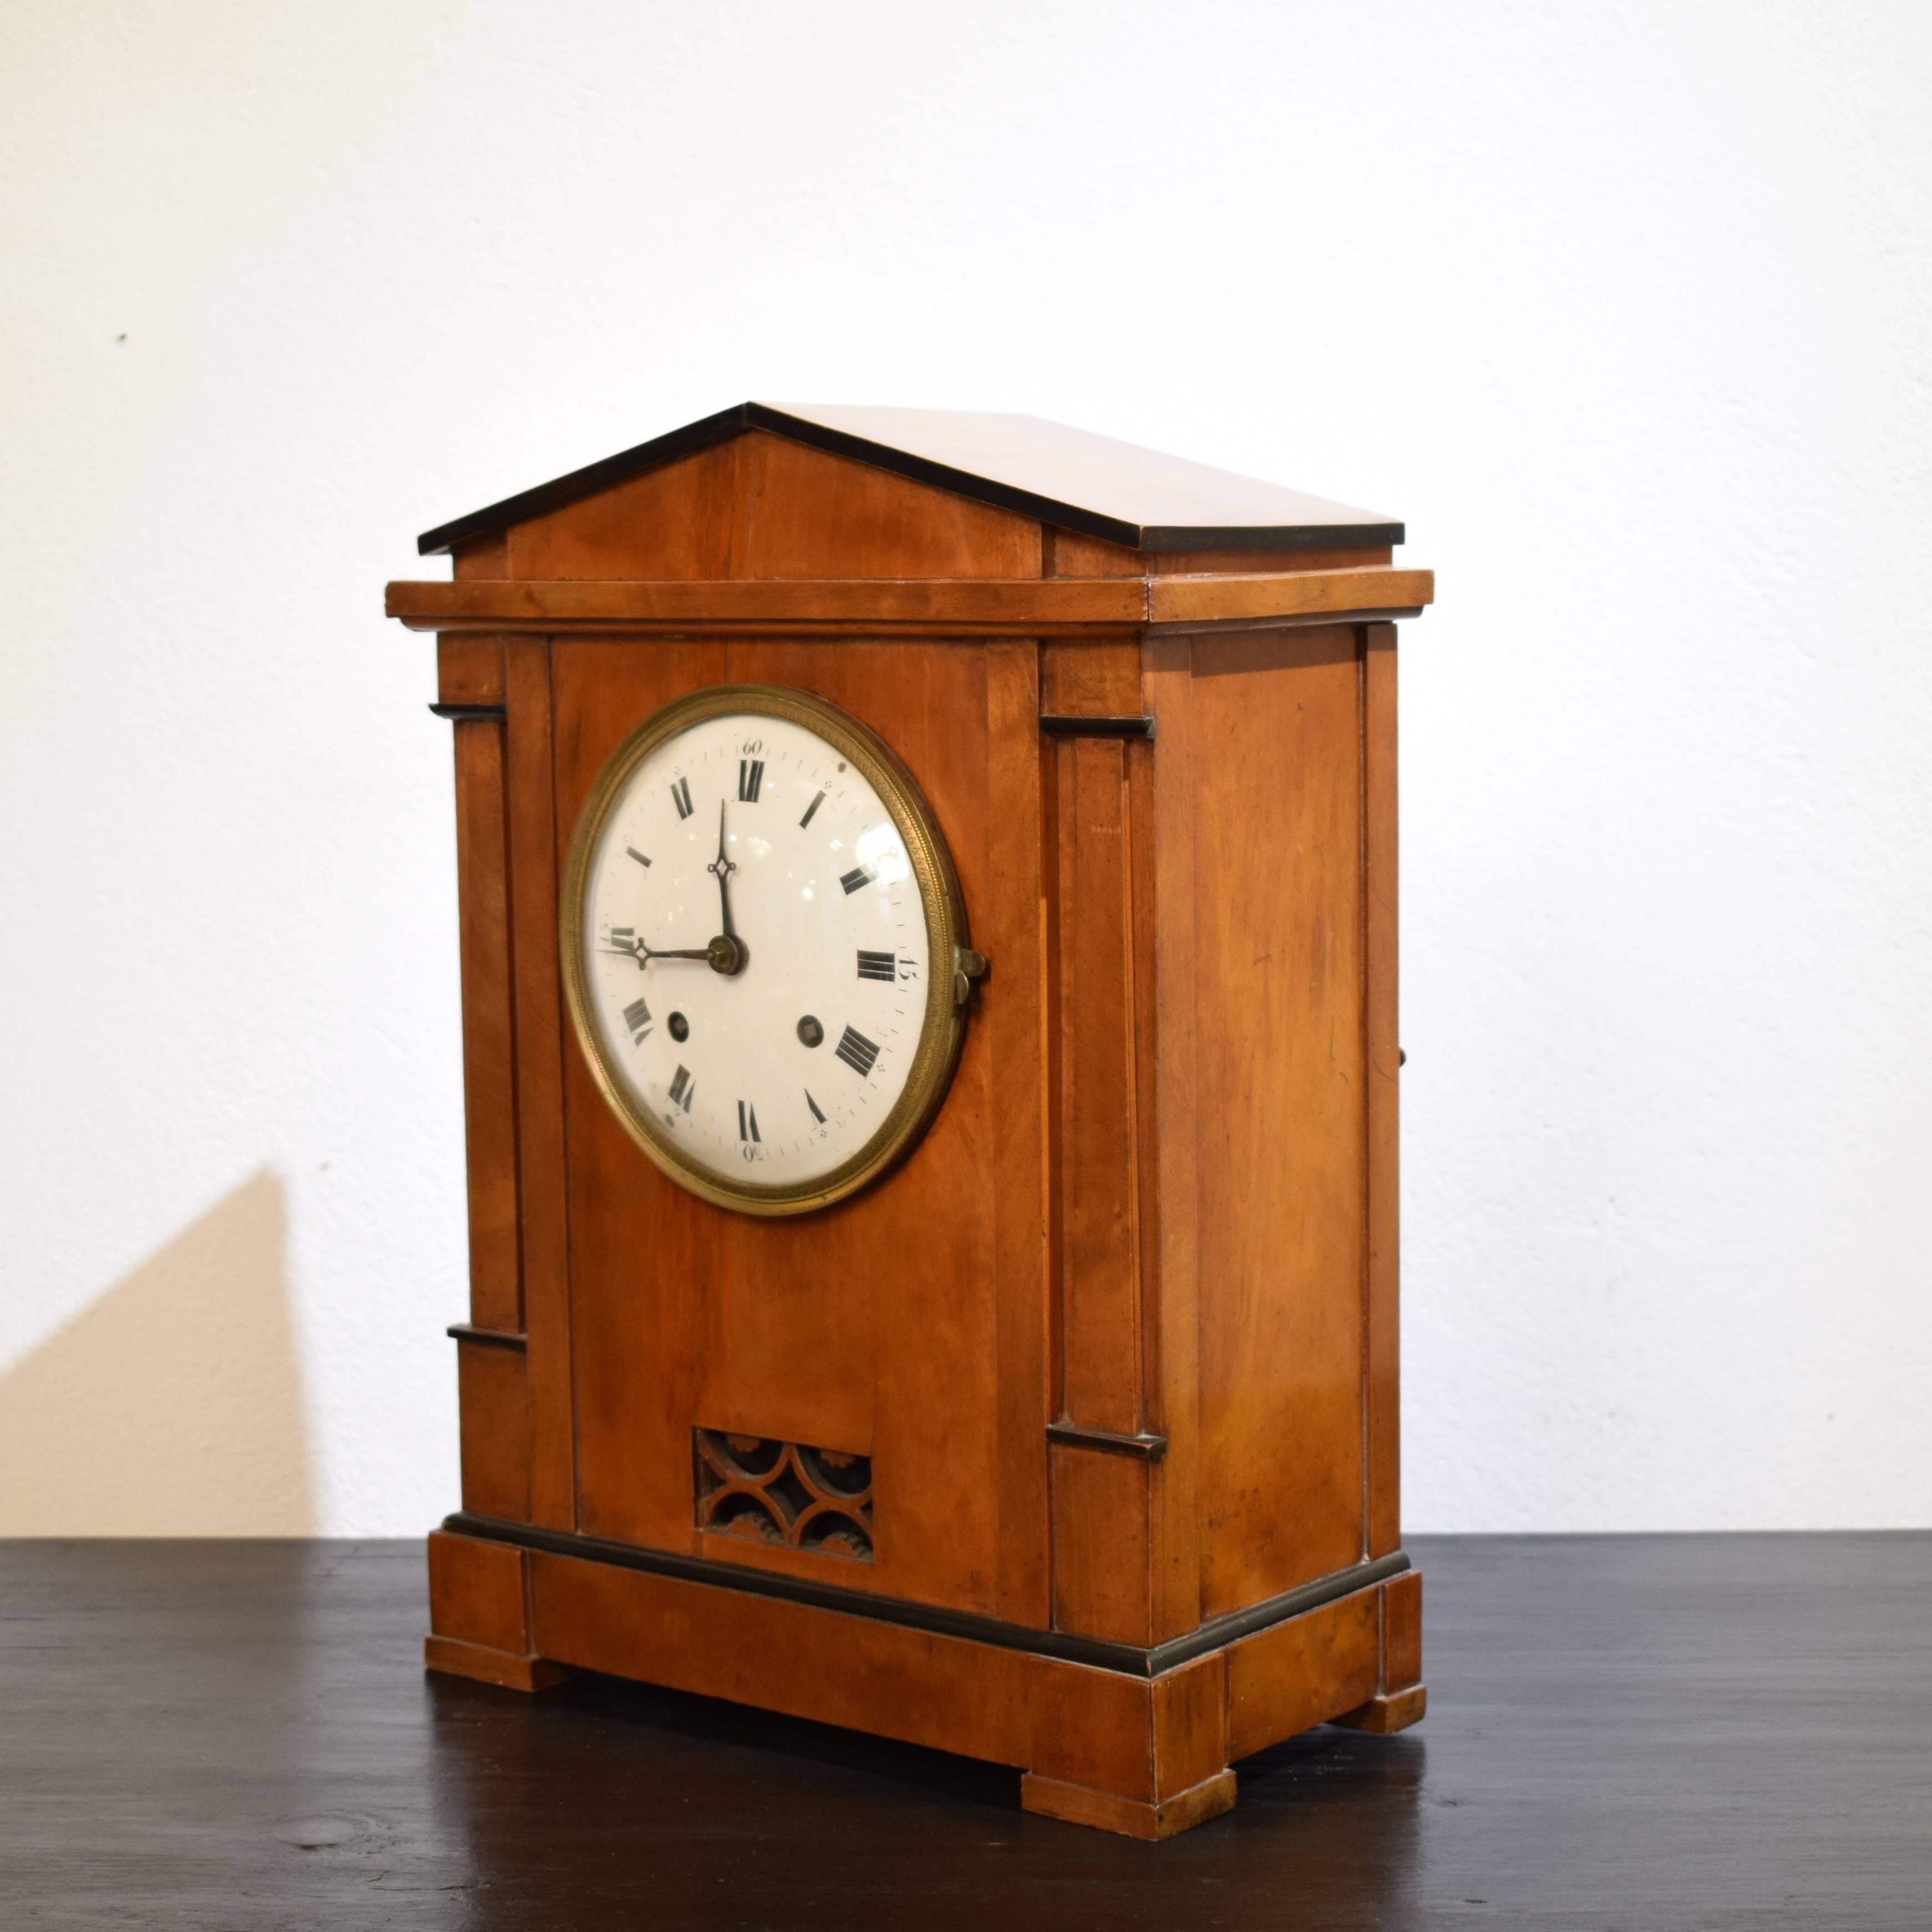 This beautiful 19th century Biedermeier mantel clock in cherrywood was made circa 1820.
The clockwork is still running and it is all original. A fantastic period piece from the 19th century.
The whole clock is in a very great patina condition.